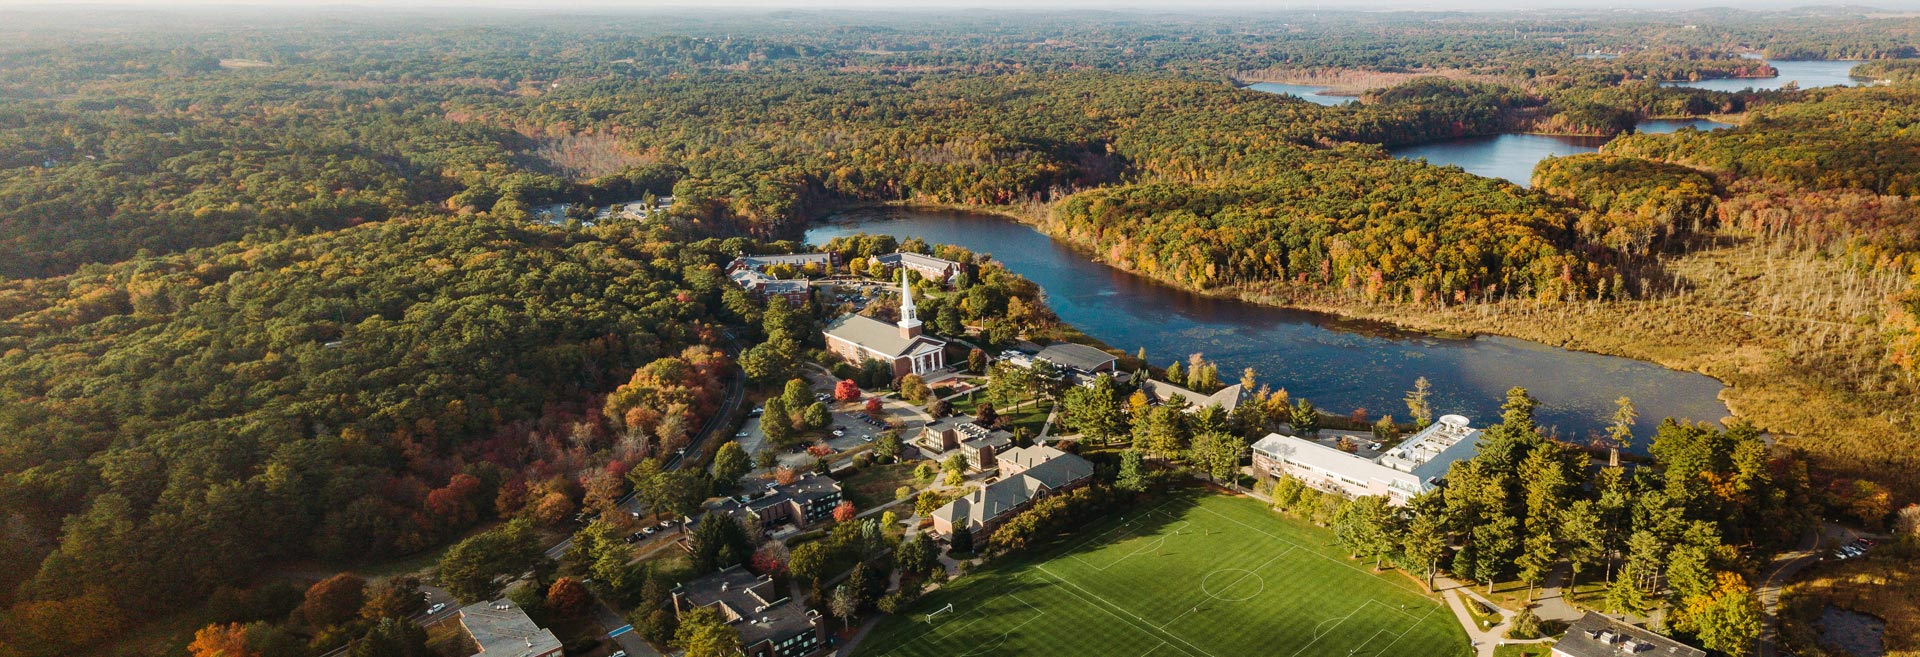 Drone shot over Gordon's campus in the fall